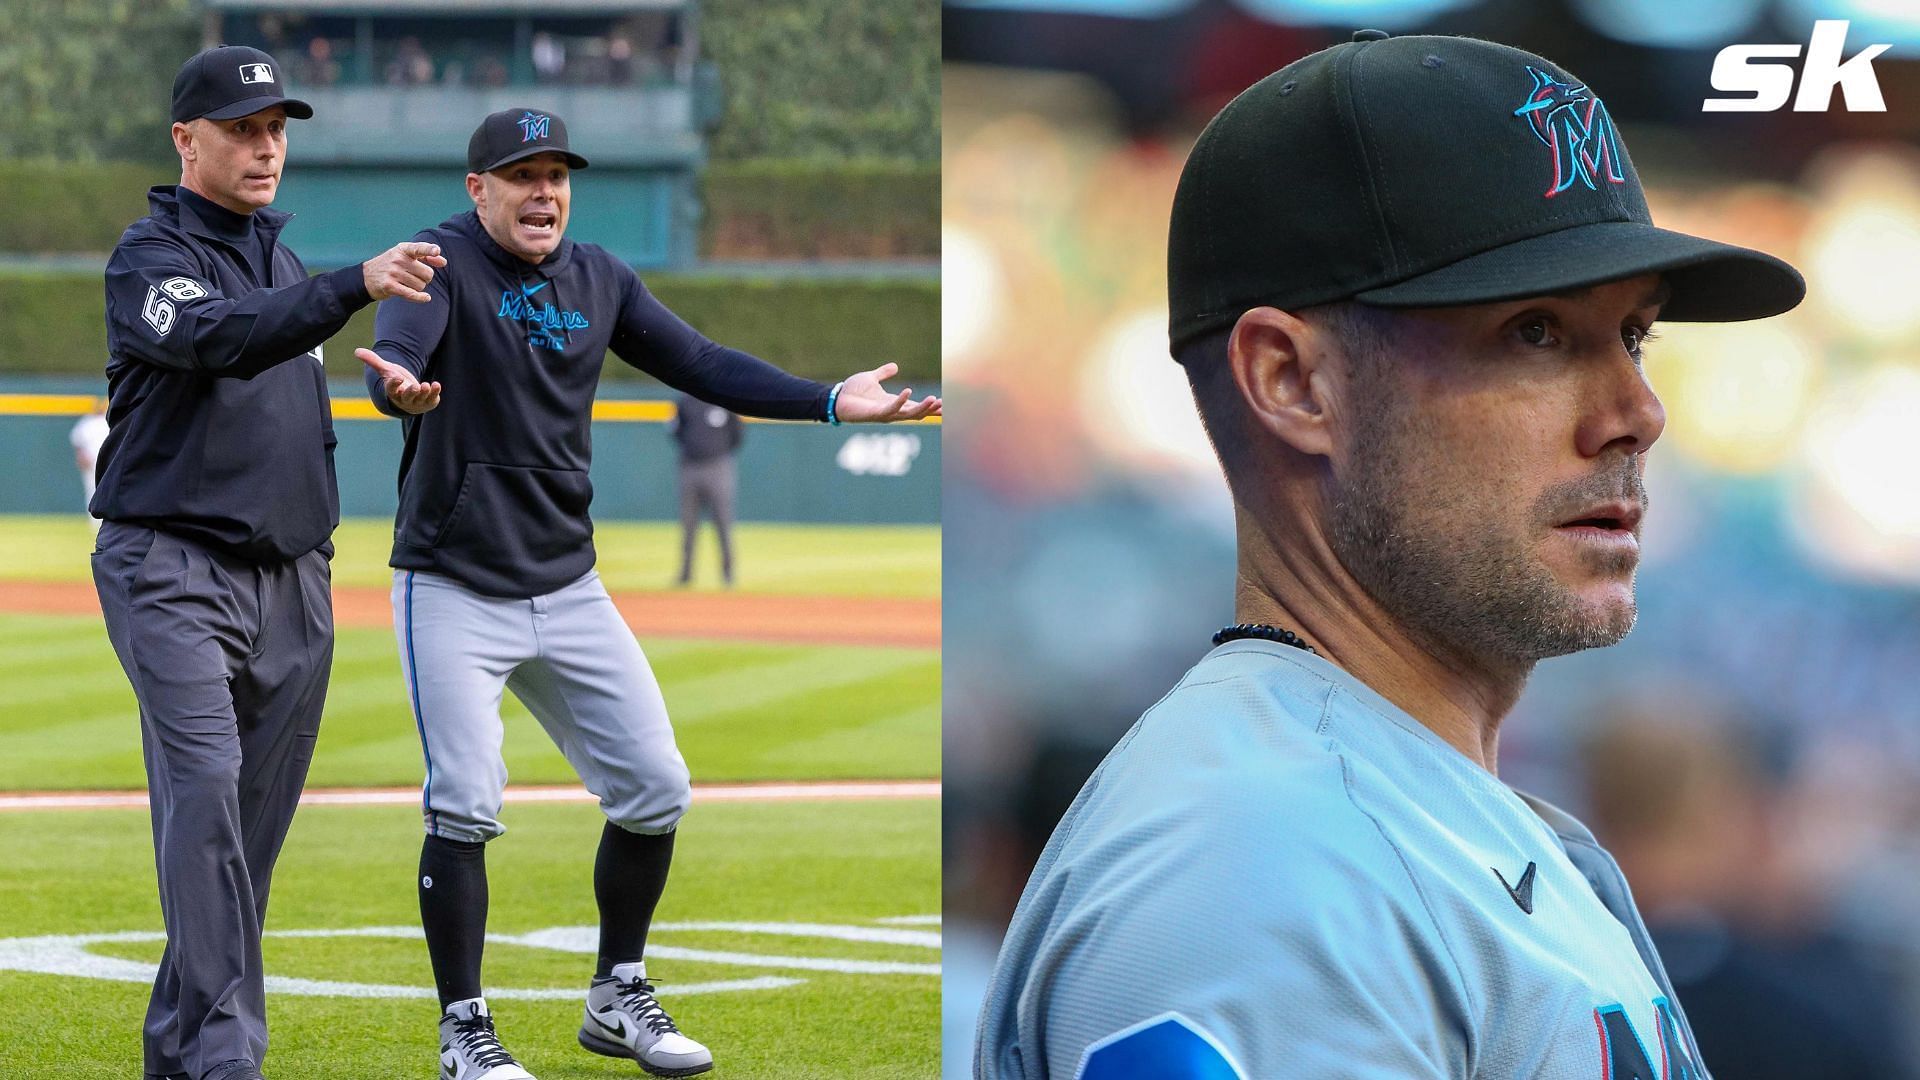 Marlins manager Skip Schumaker was nearly ejected after umpire mistakes who heckled him